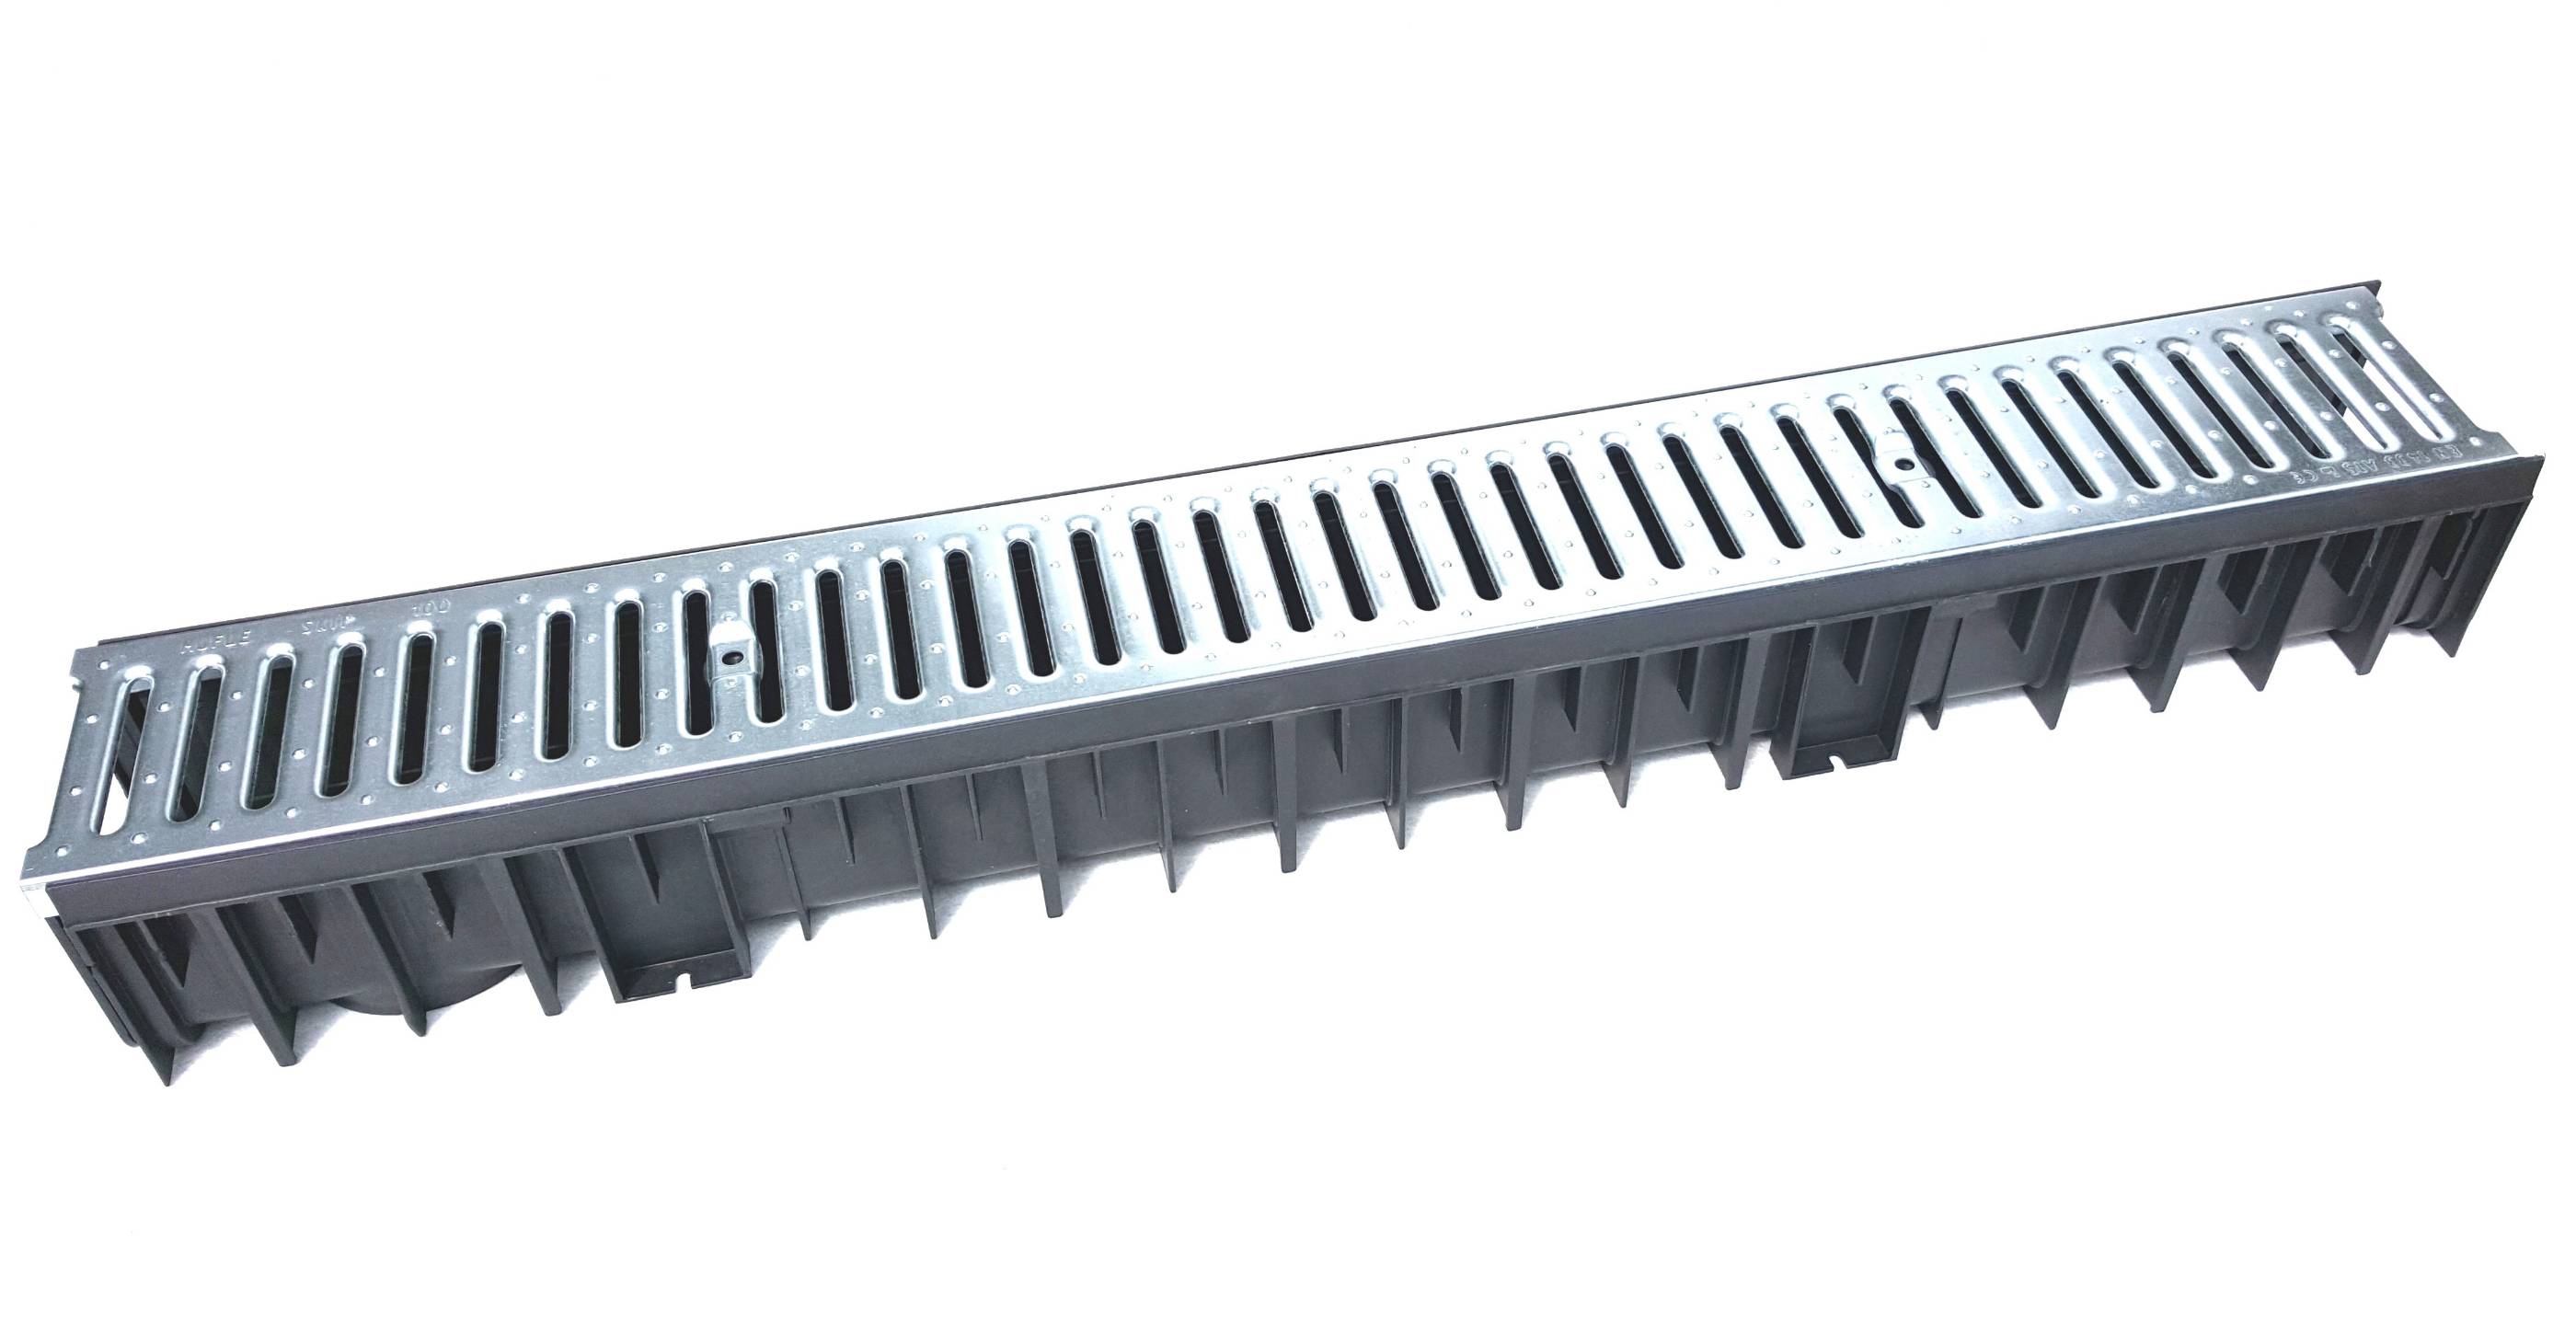 Protecto-drain - A15 Class Drainage Channel